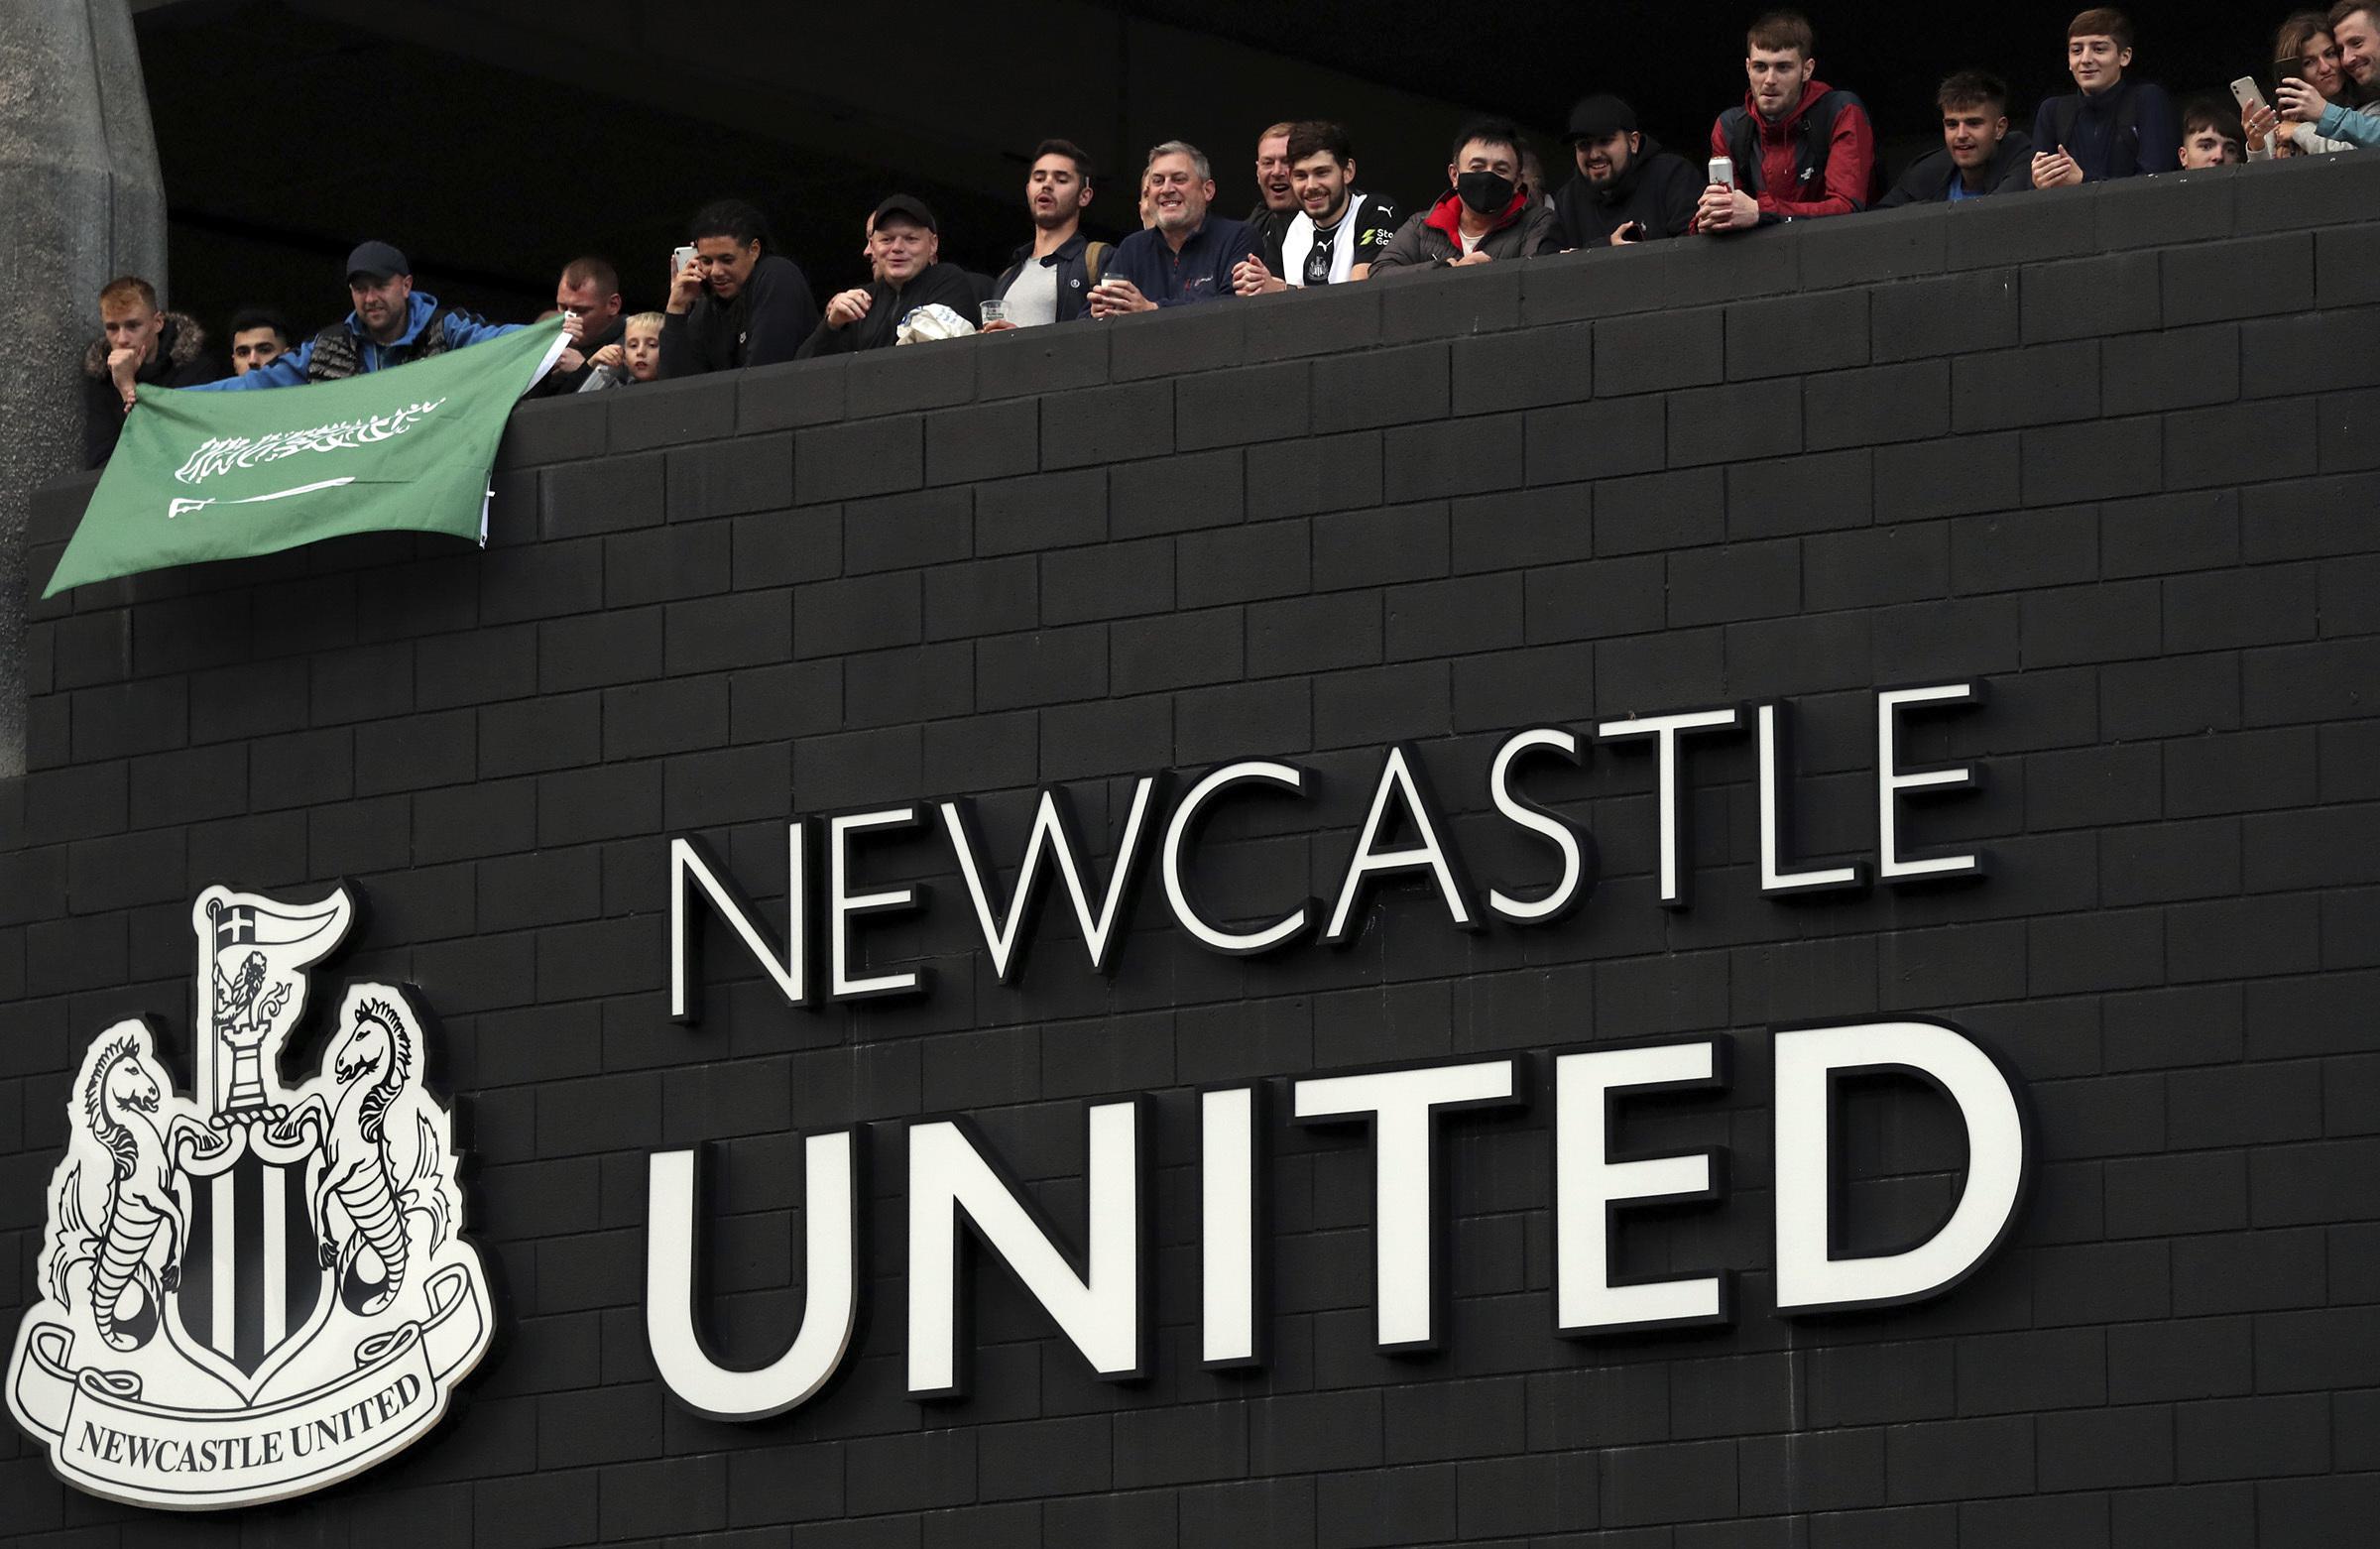 Saudi-funded Newcastle on inexorable path to soccer’s summit